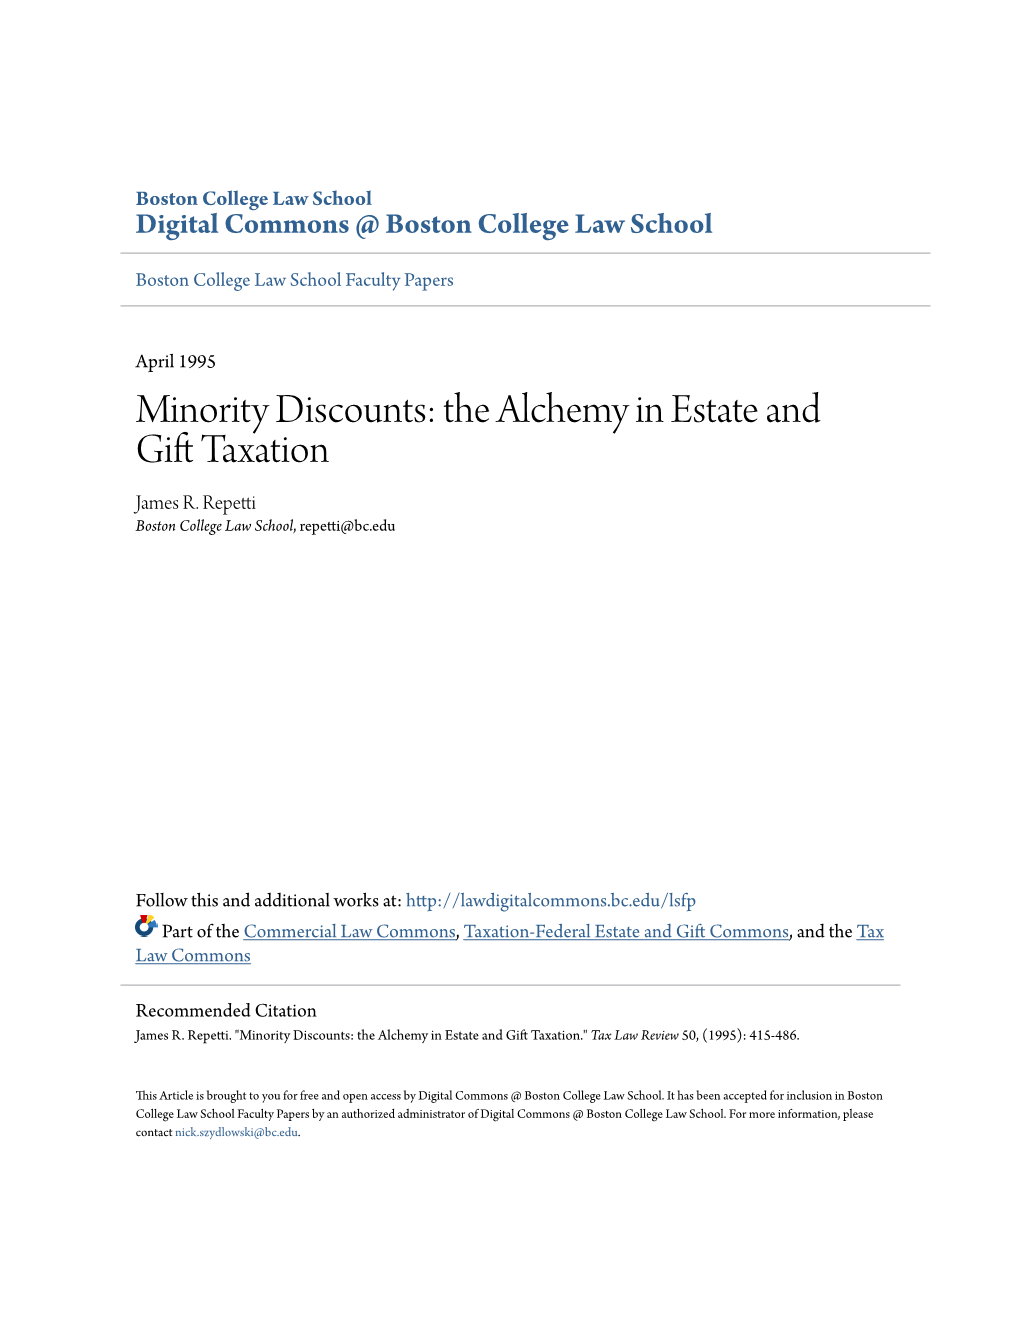 Minority Discounts: the Alchemy in Estate and Gift at Xation James R